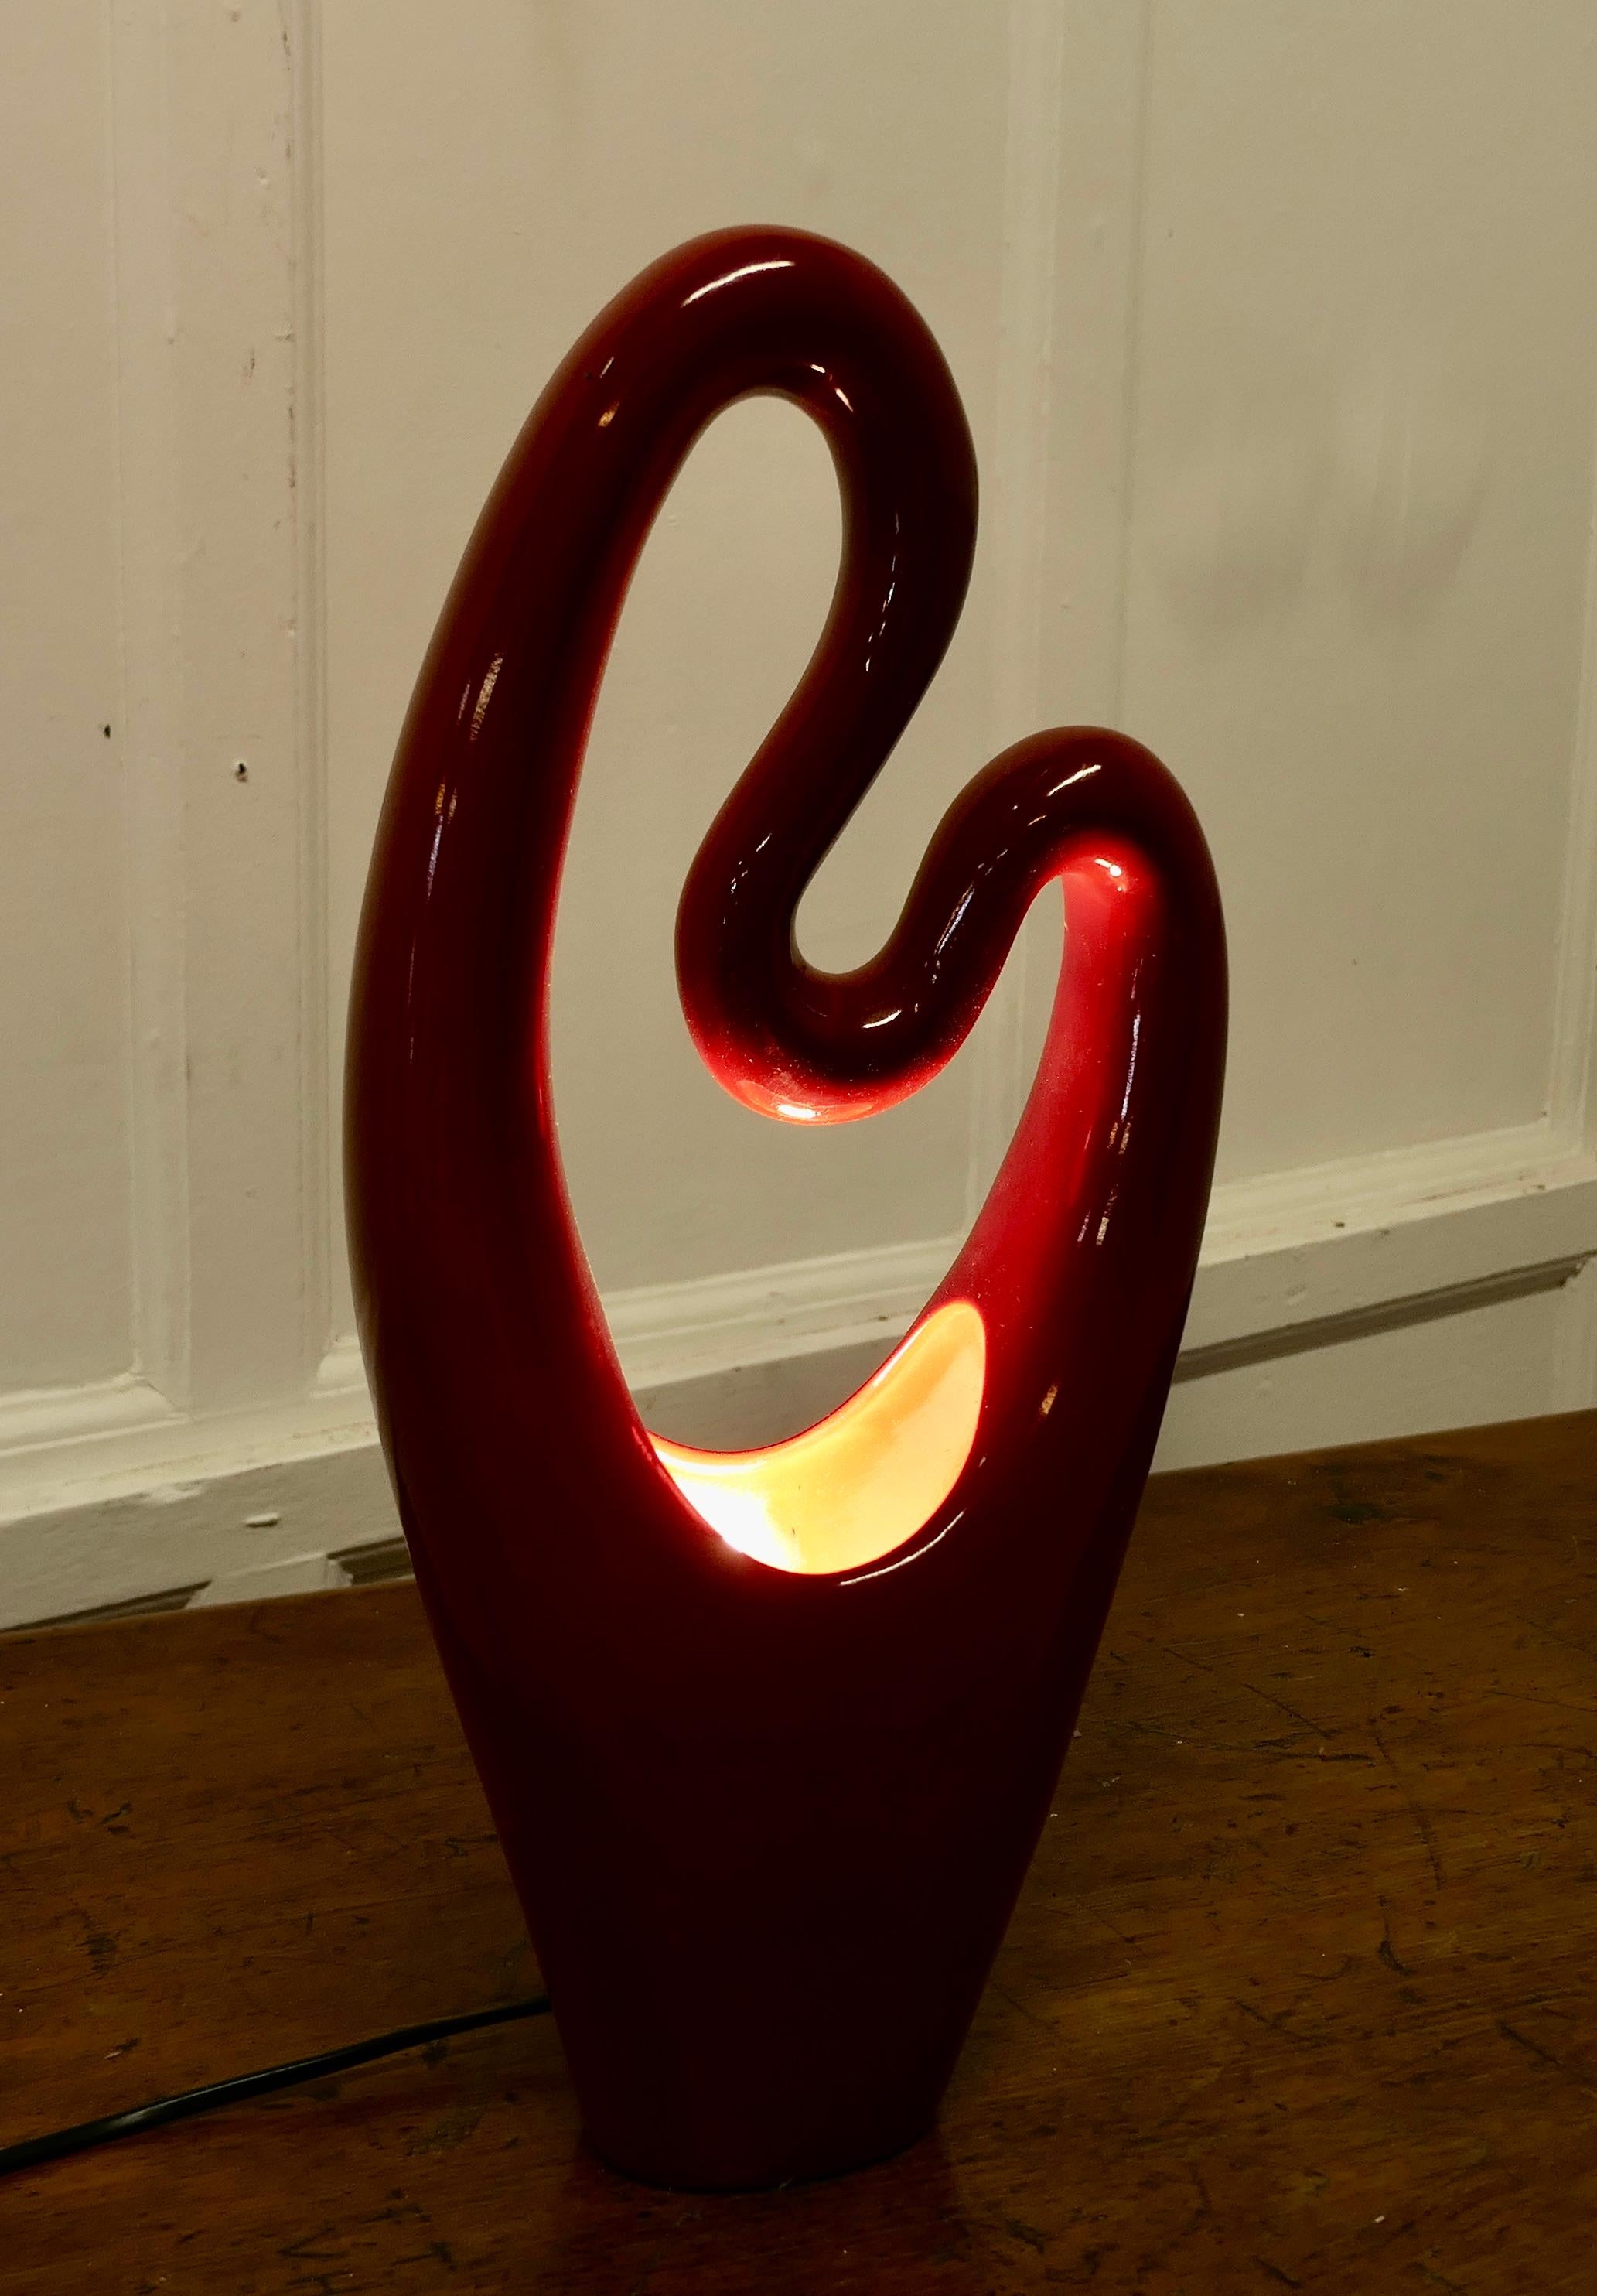 Mid Century Abstract Ceramic Lamp in Cerise

An unusual shape with the light bulb concealed in the bottom of the lamp, this makes unusual and attractive patterns when lit
The lamp is 18” tall, 8” wide ands 4” deep
MS269